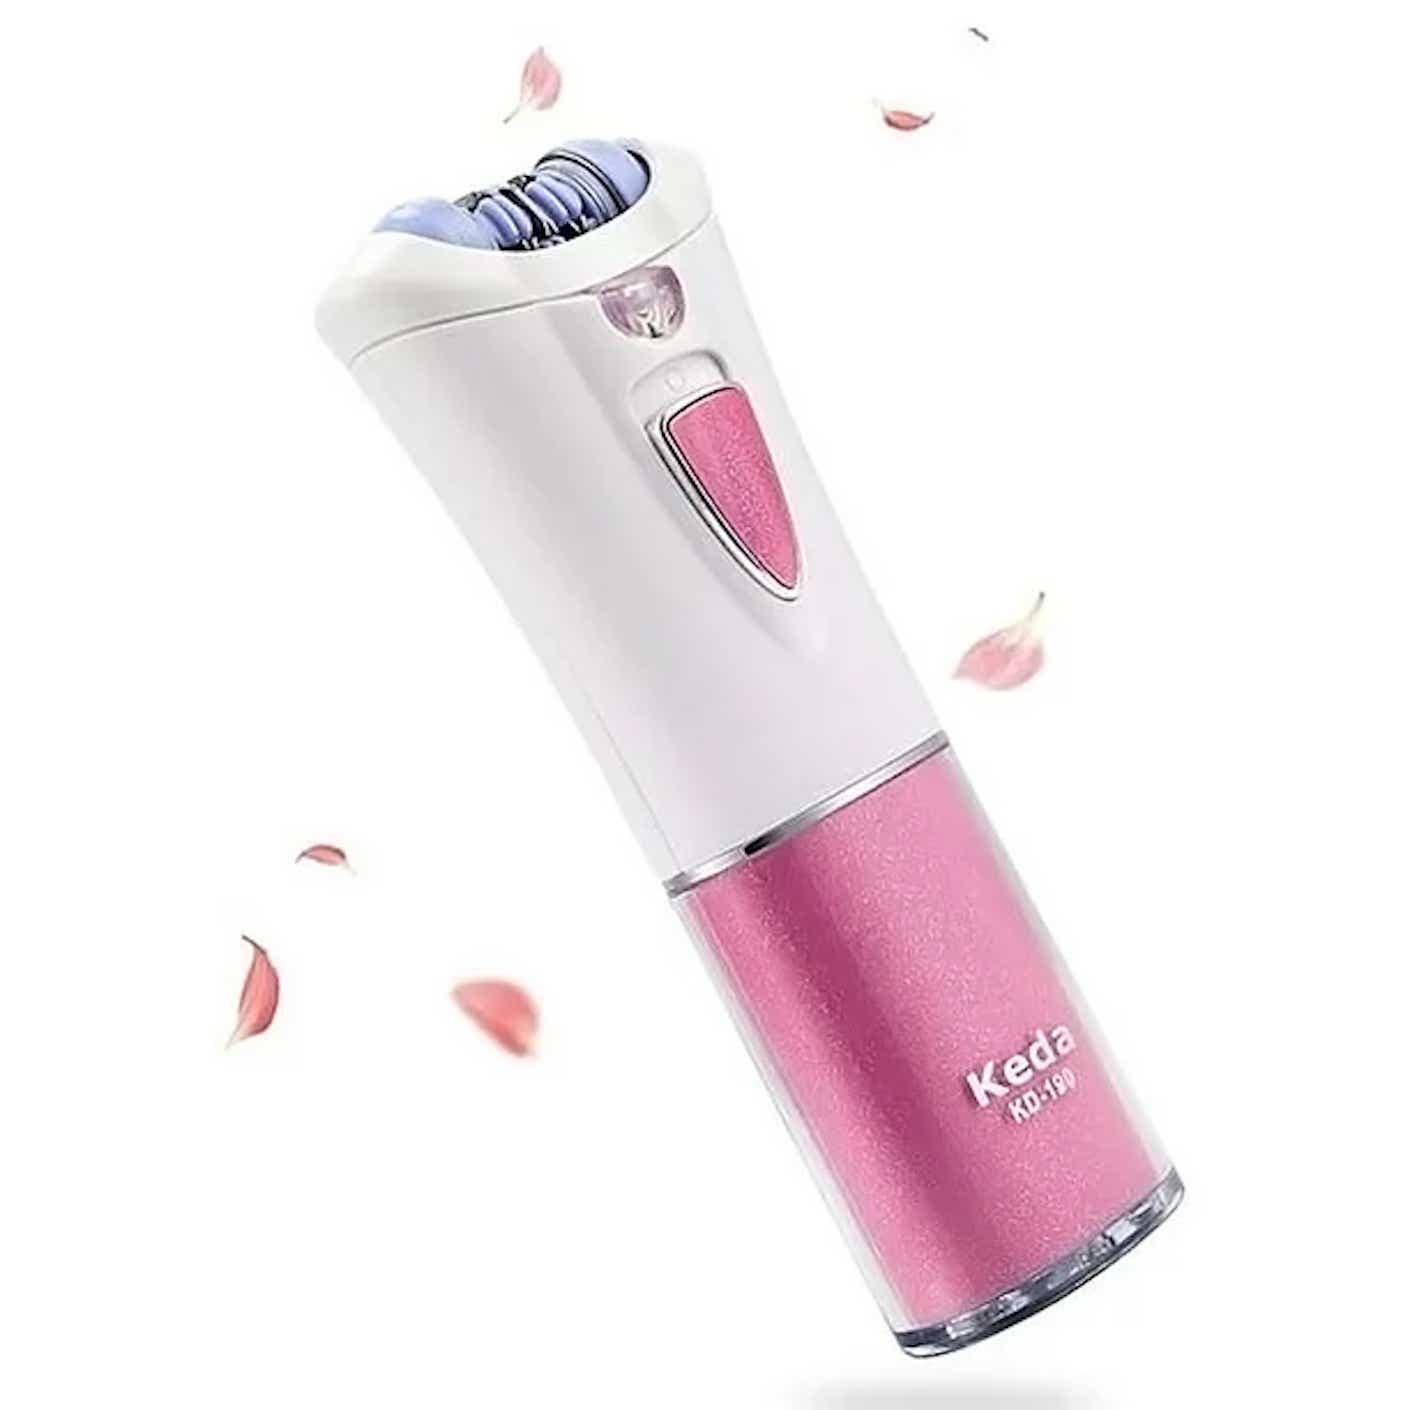 A pink and white electric tweezer is pictured alongside fluttering pink petals.